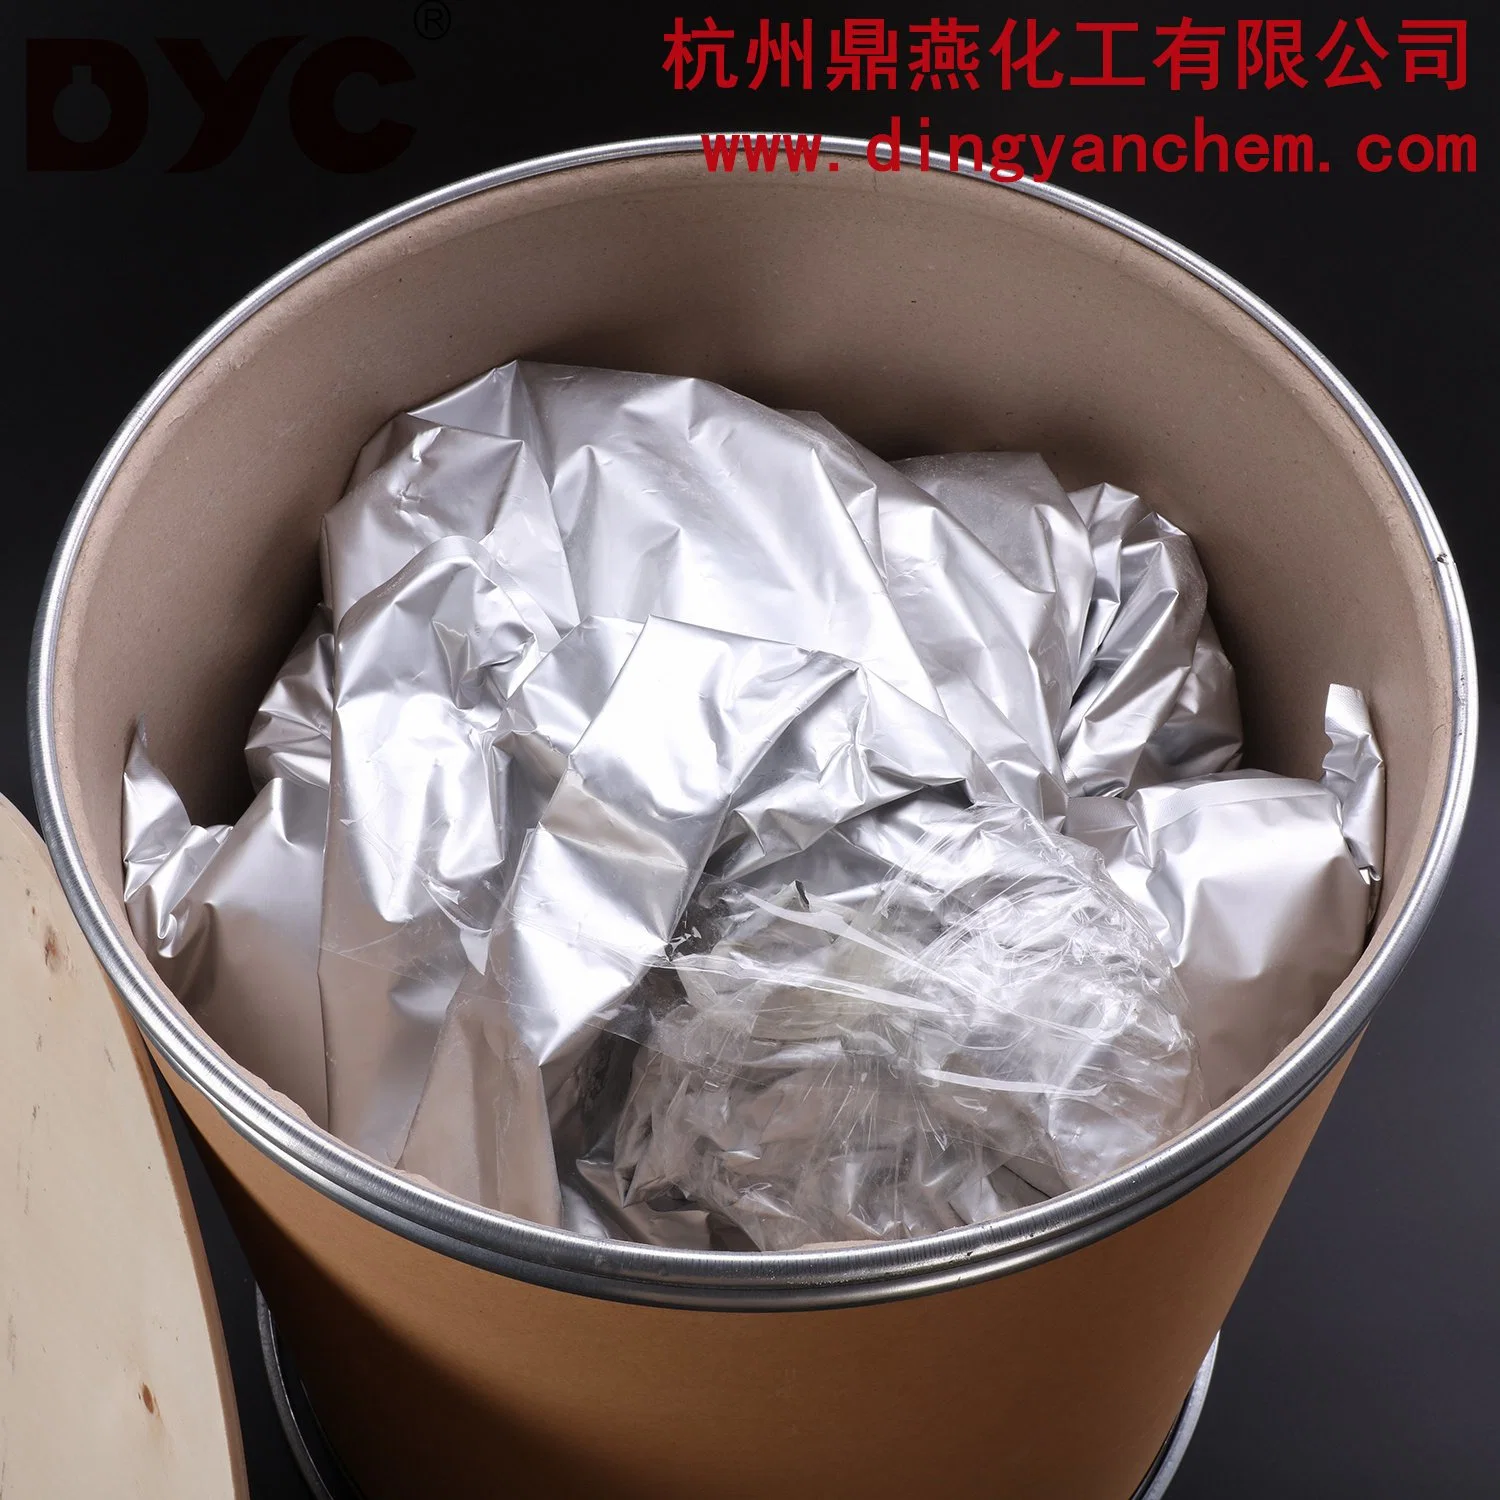 Daily Raw Material Medicine Sodium Hyaluronate Purity Degree 99% CAS No. 9067-32-7